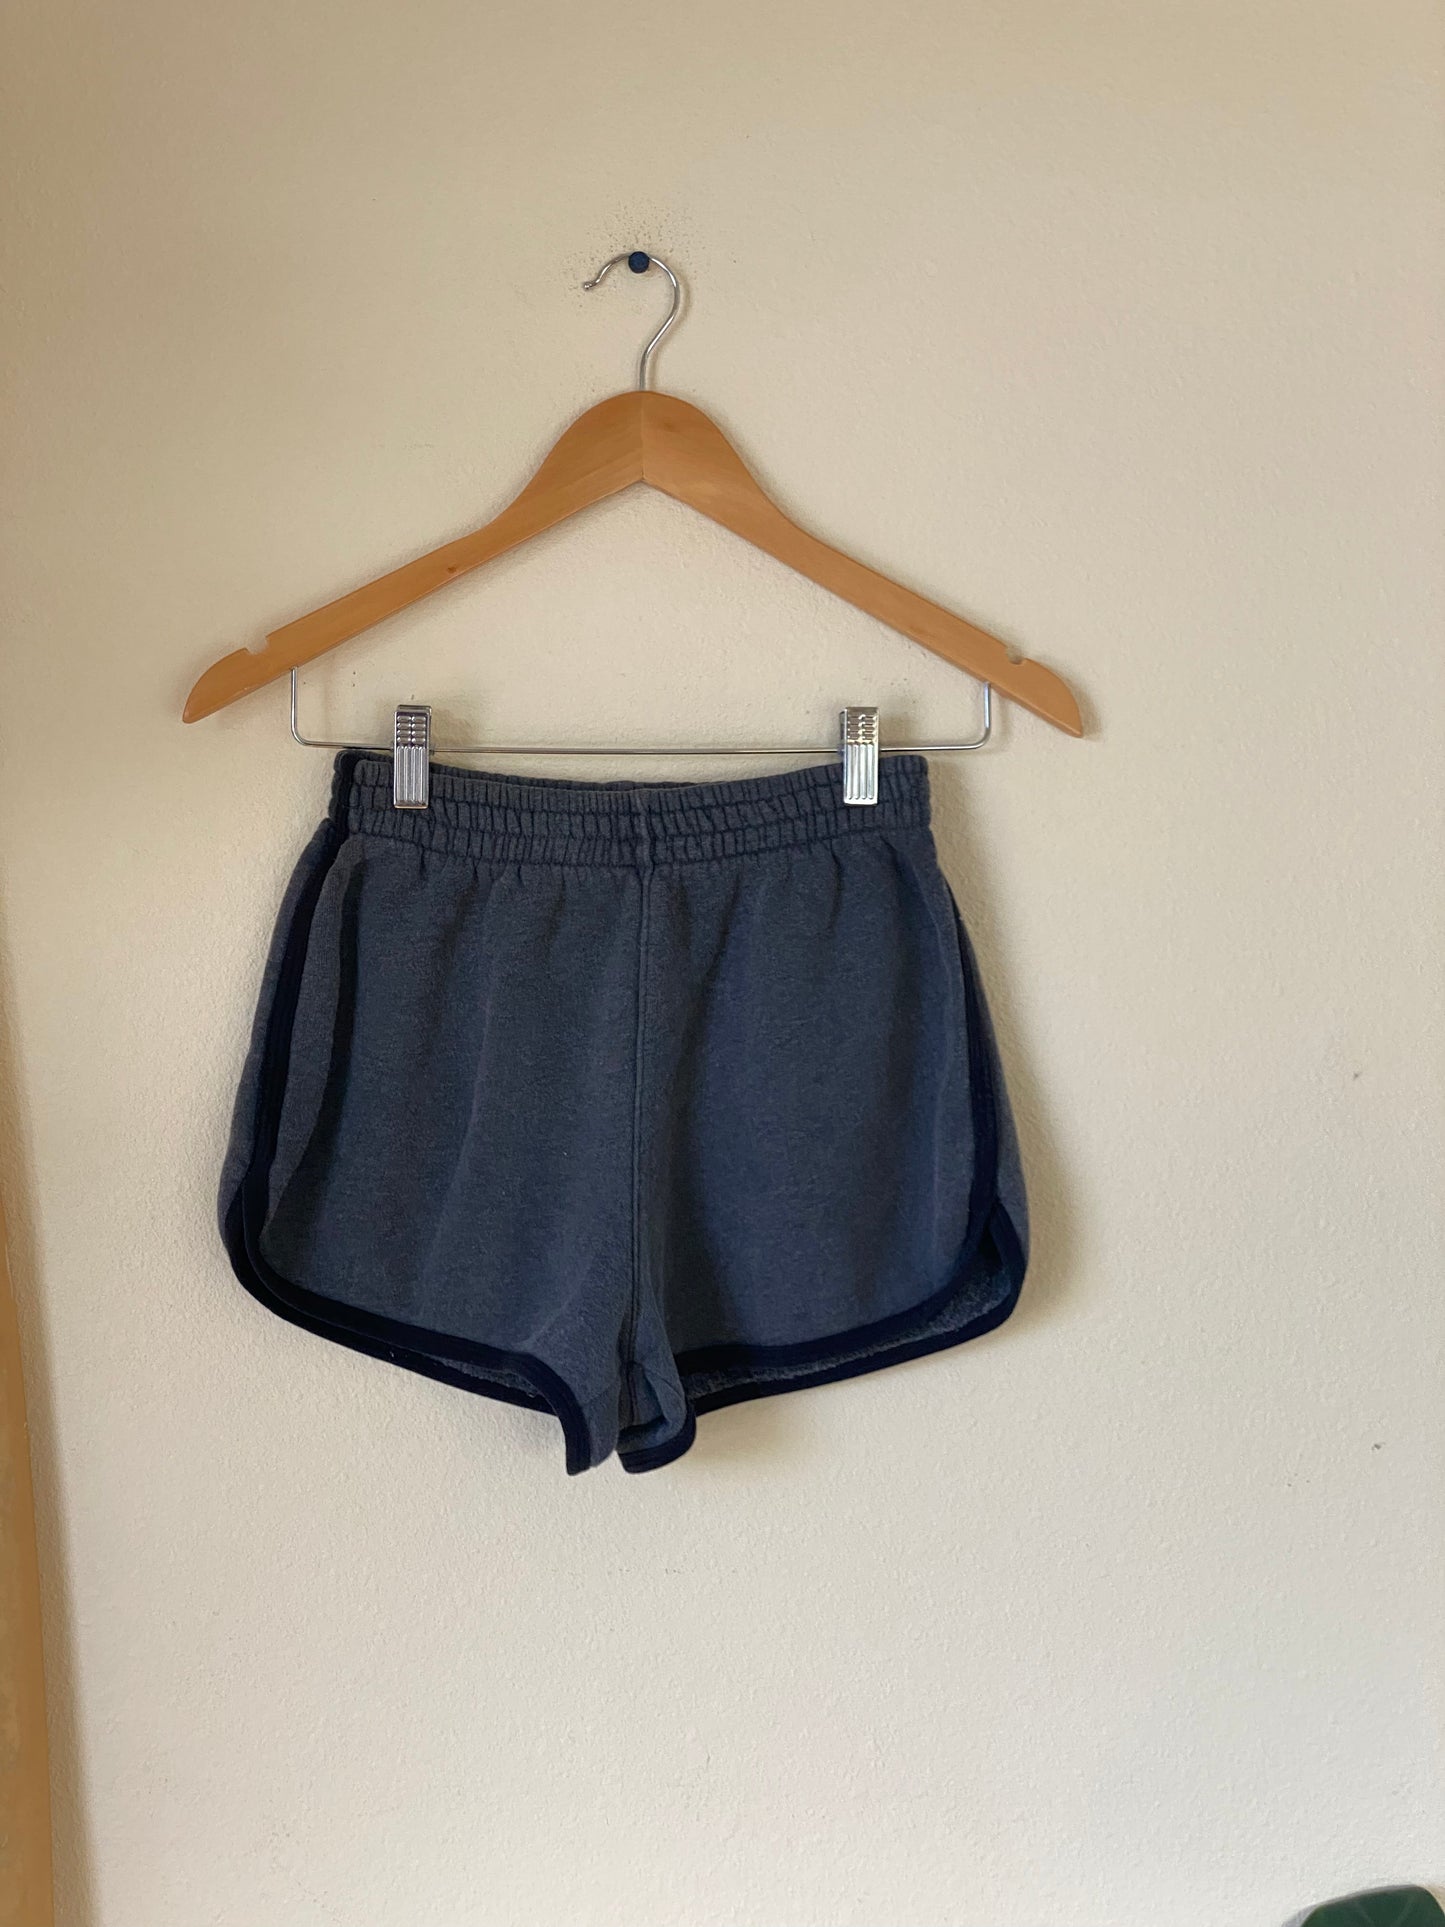 Brandy Melville Grey Booty Shorts SIZE XSMALL/SMALL